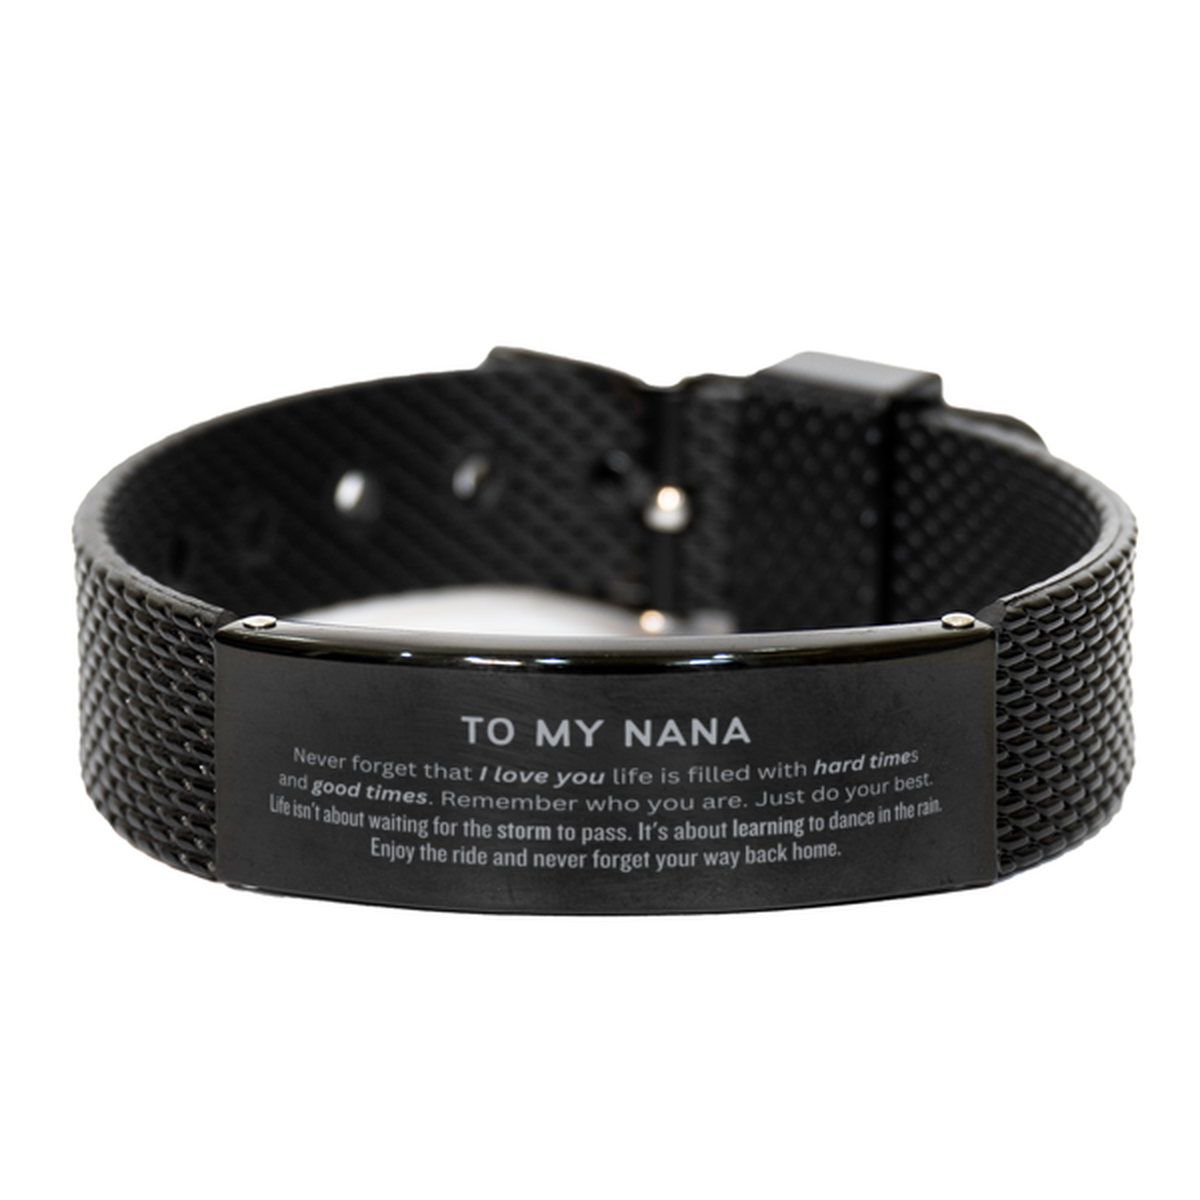 Christmas Nana Black Shark Mesh Bracelet Gifts, To My Nana Birthday Thank You Gifts For Nana, Graduation Unique Gifts For Nana To My Nana Never forget that I love you life is filled with hard times and good times. Remember who you are. Just do your best